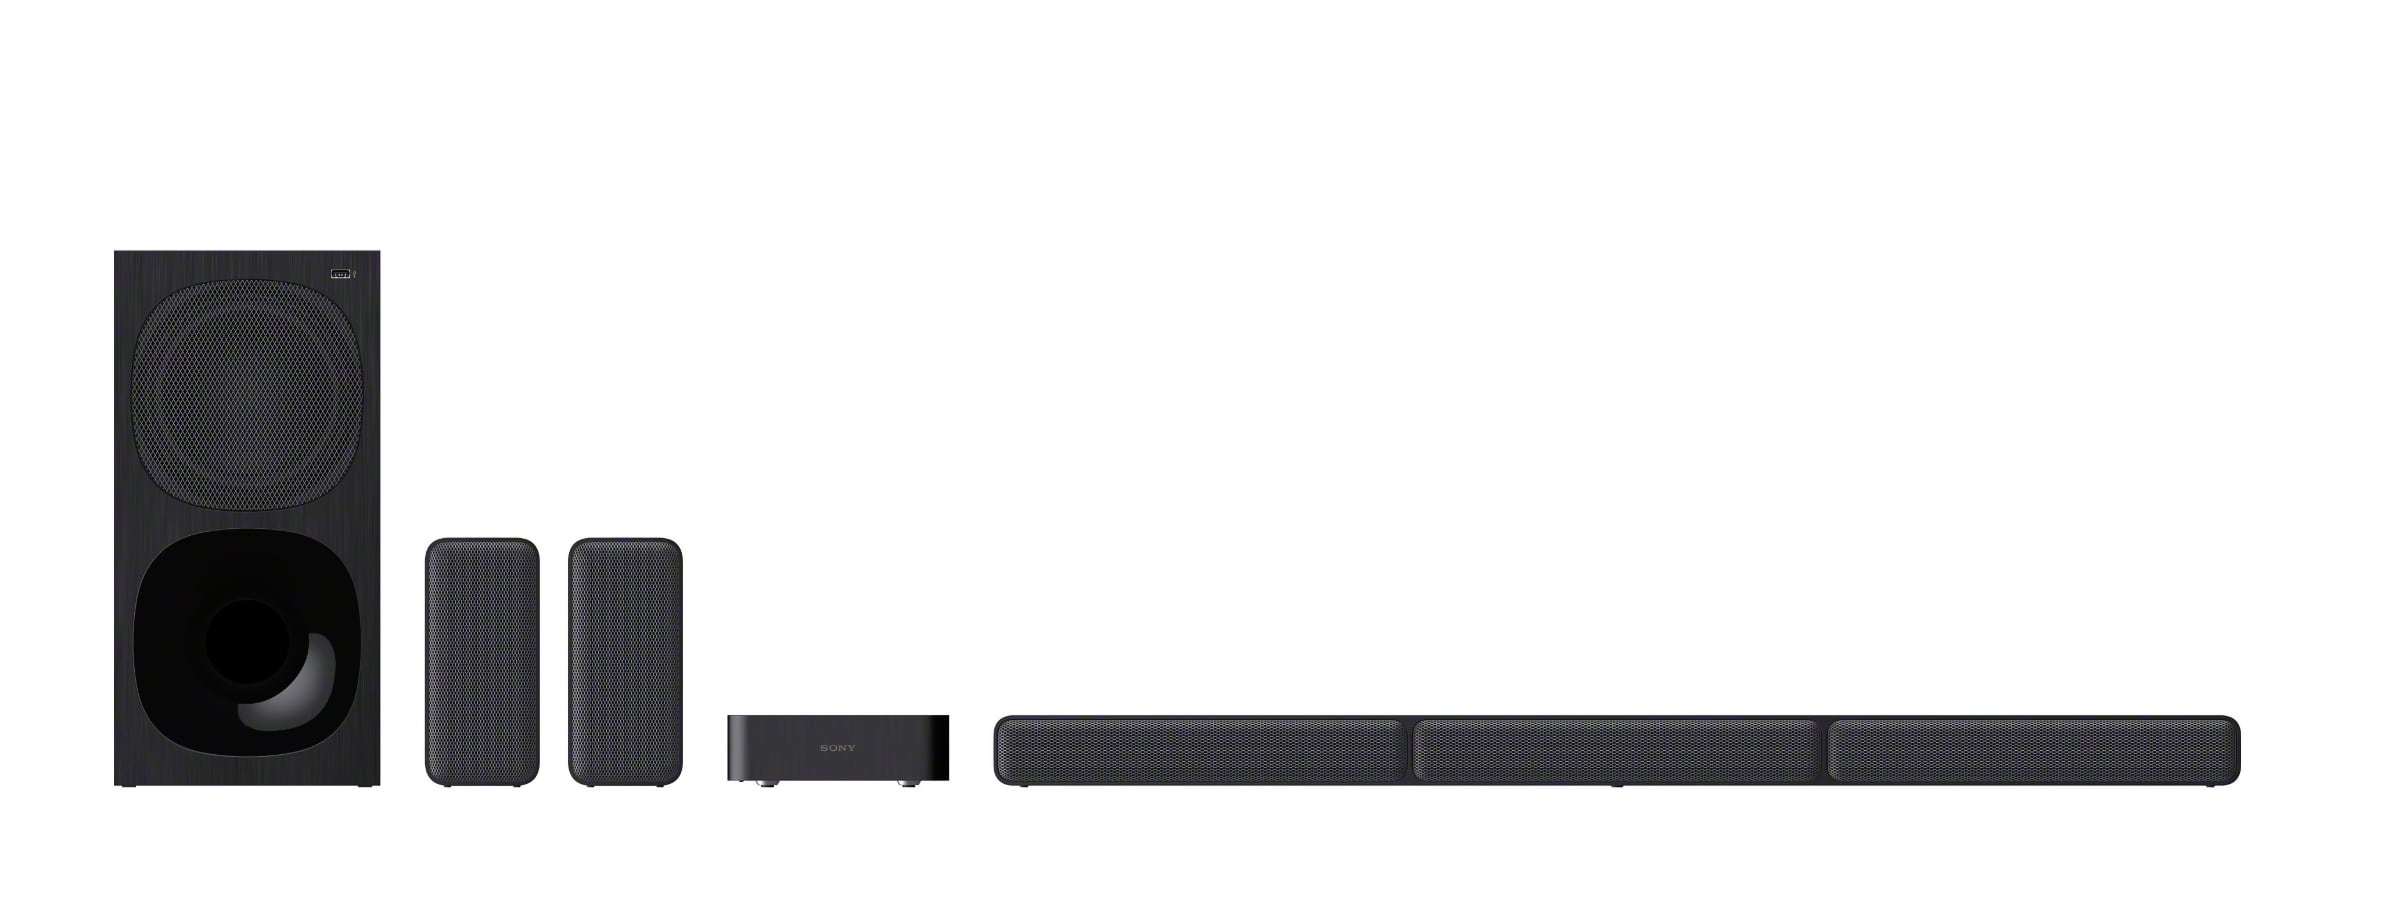 Sony launches 5.1 soundbar with wireless sub & rear speakers, HT-S40R